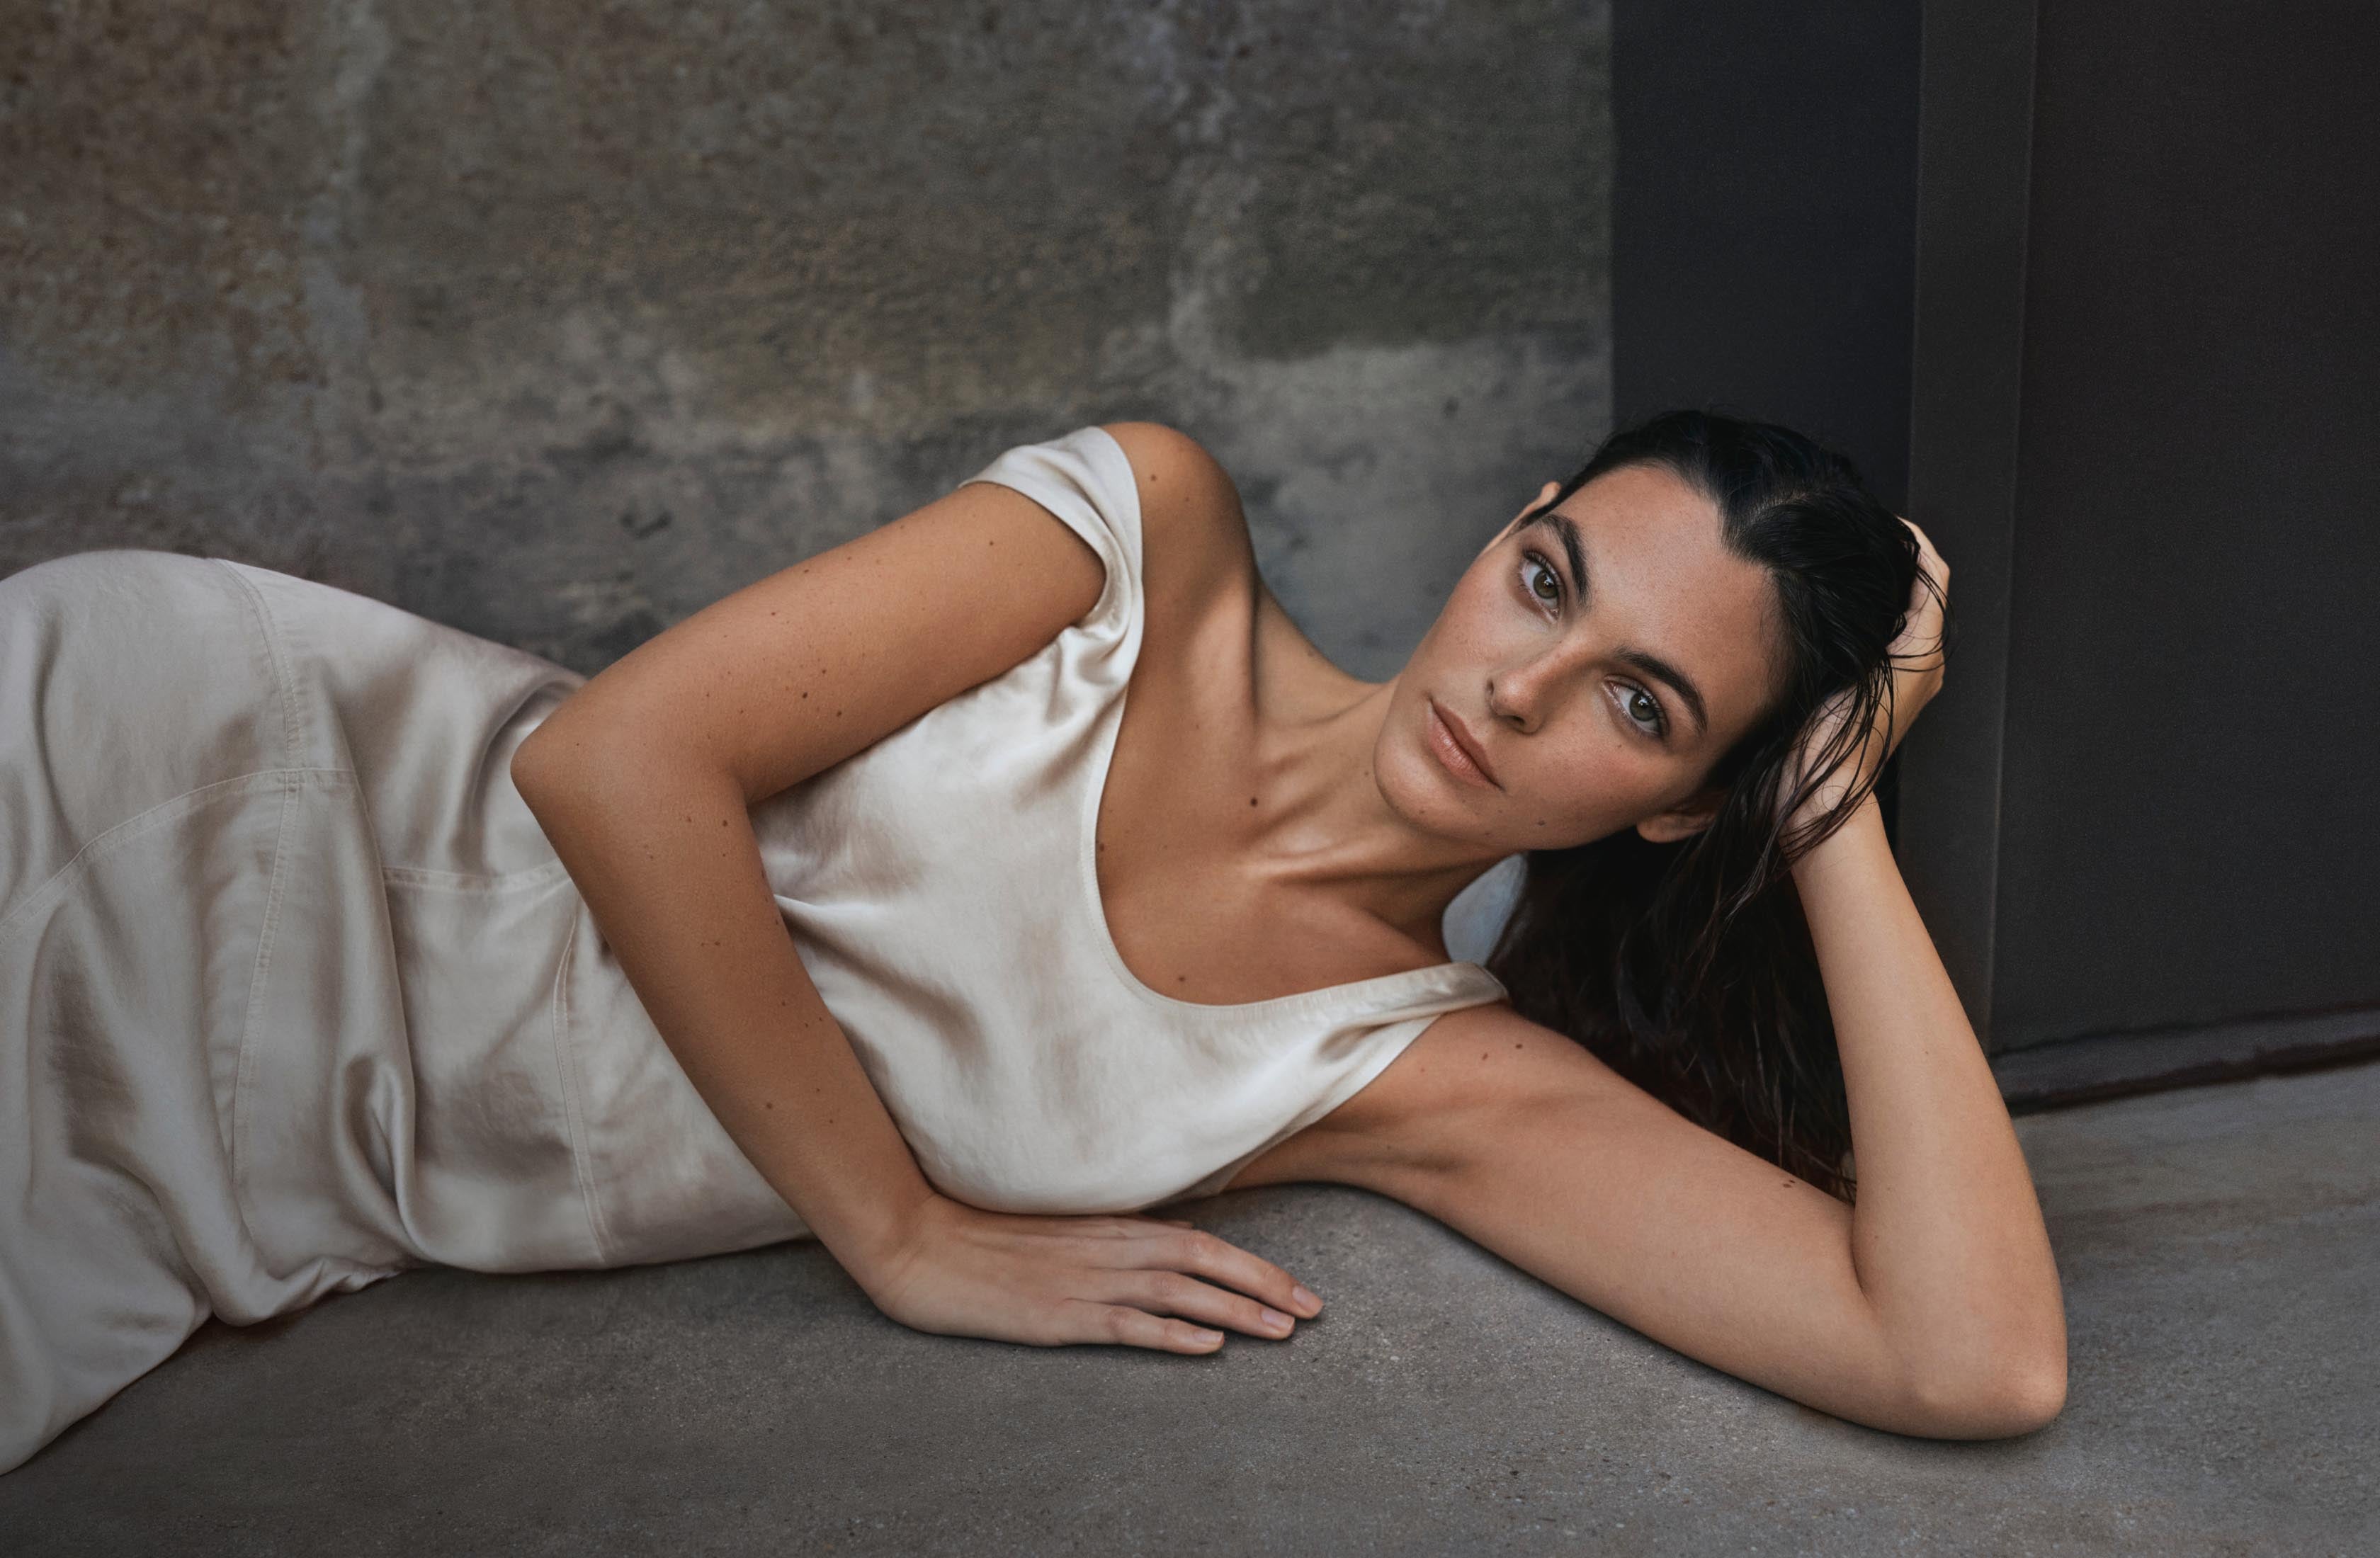 A model posing laying down on her side wearing a white satin maxi dress